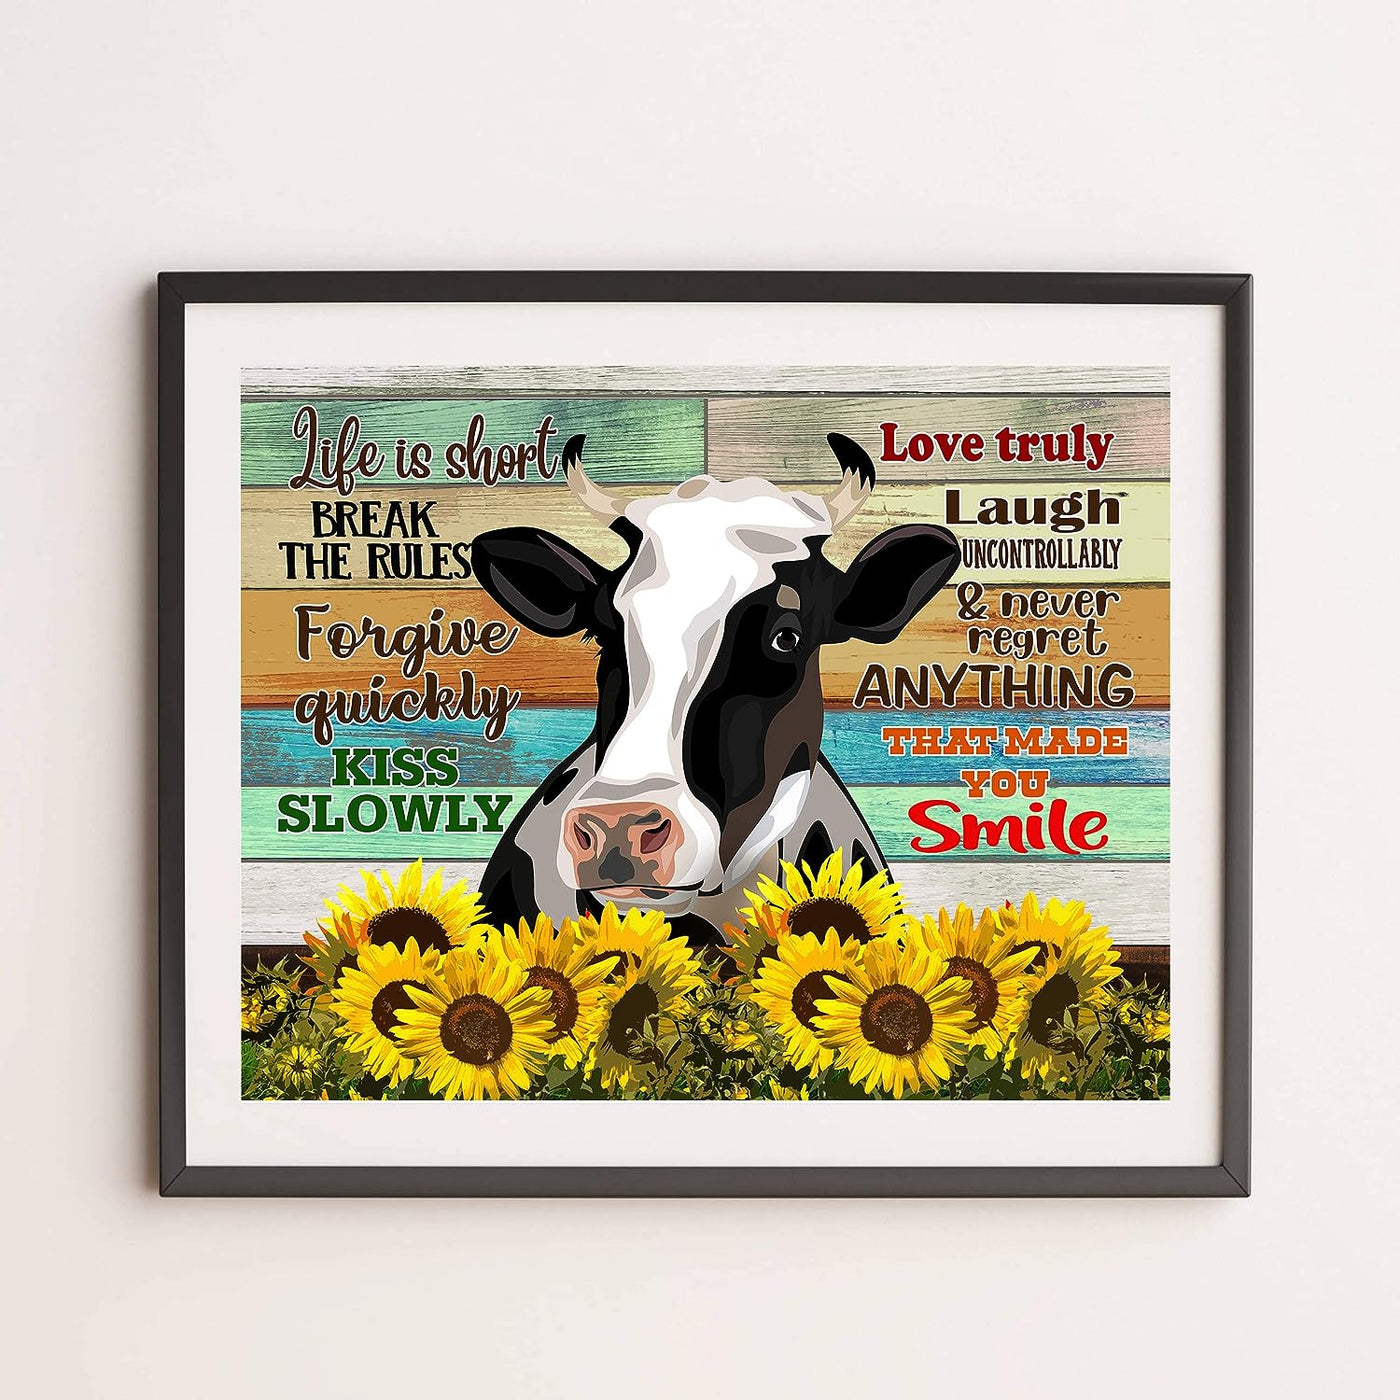 Life Is Short-Break the Rules-Inspirational Cow Wall Art-14 x 11" Rustic Farmhouse Print w/Wood Design & Sunflower Images-Ready to Frame. Country Decor for Home-Dining Room. Printed on Photo Paper.